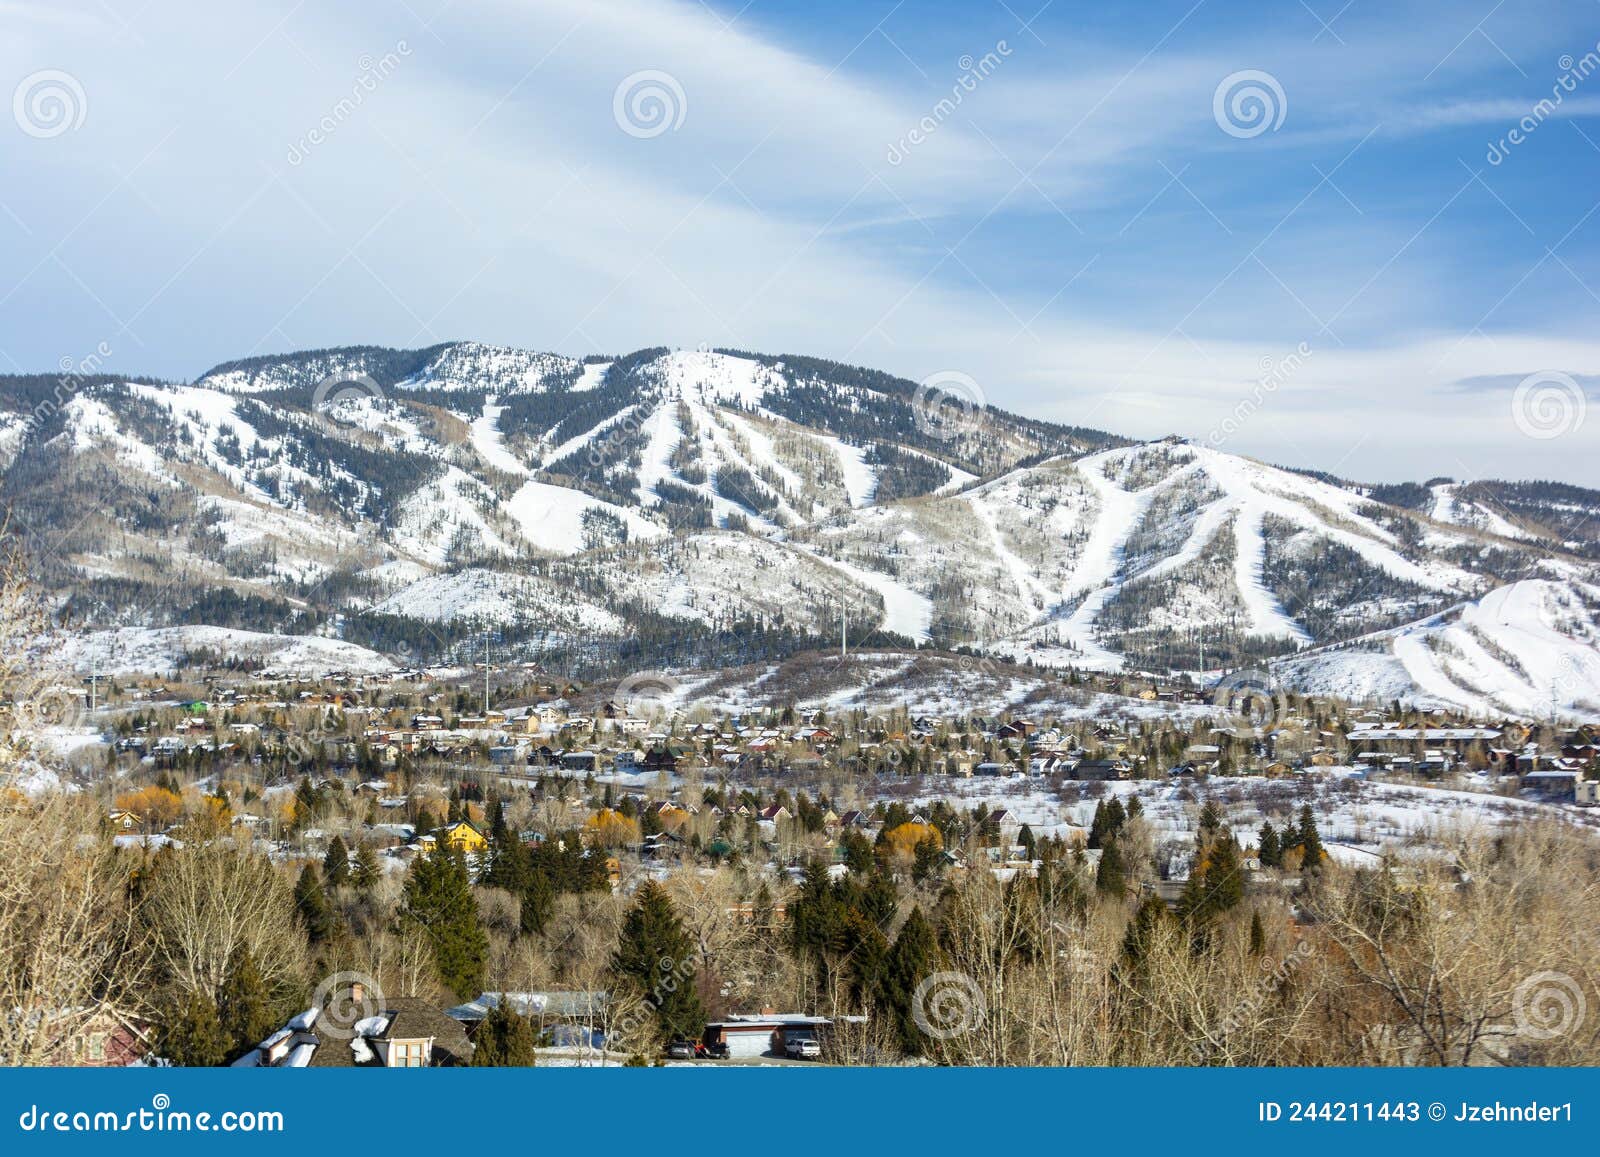 steamboat ski resort in steamboat springs, colorado on a sunny winter day